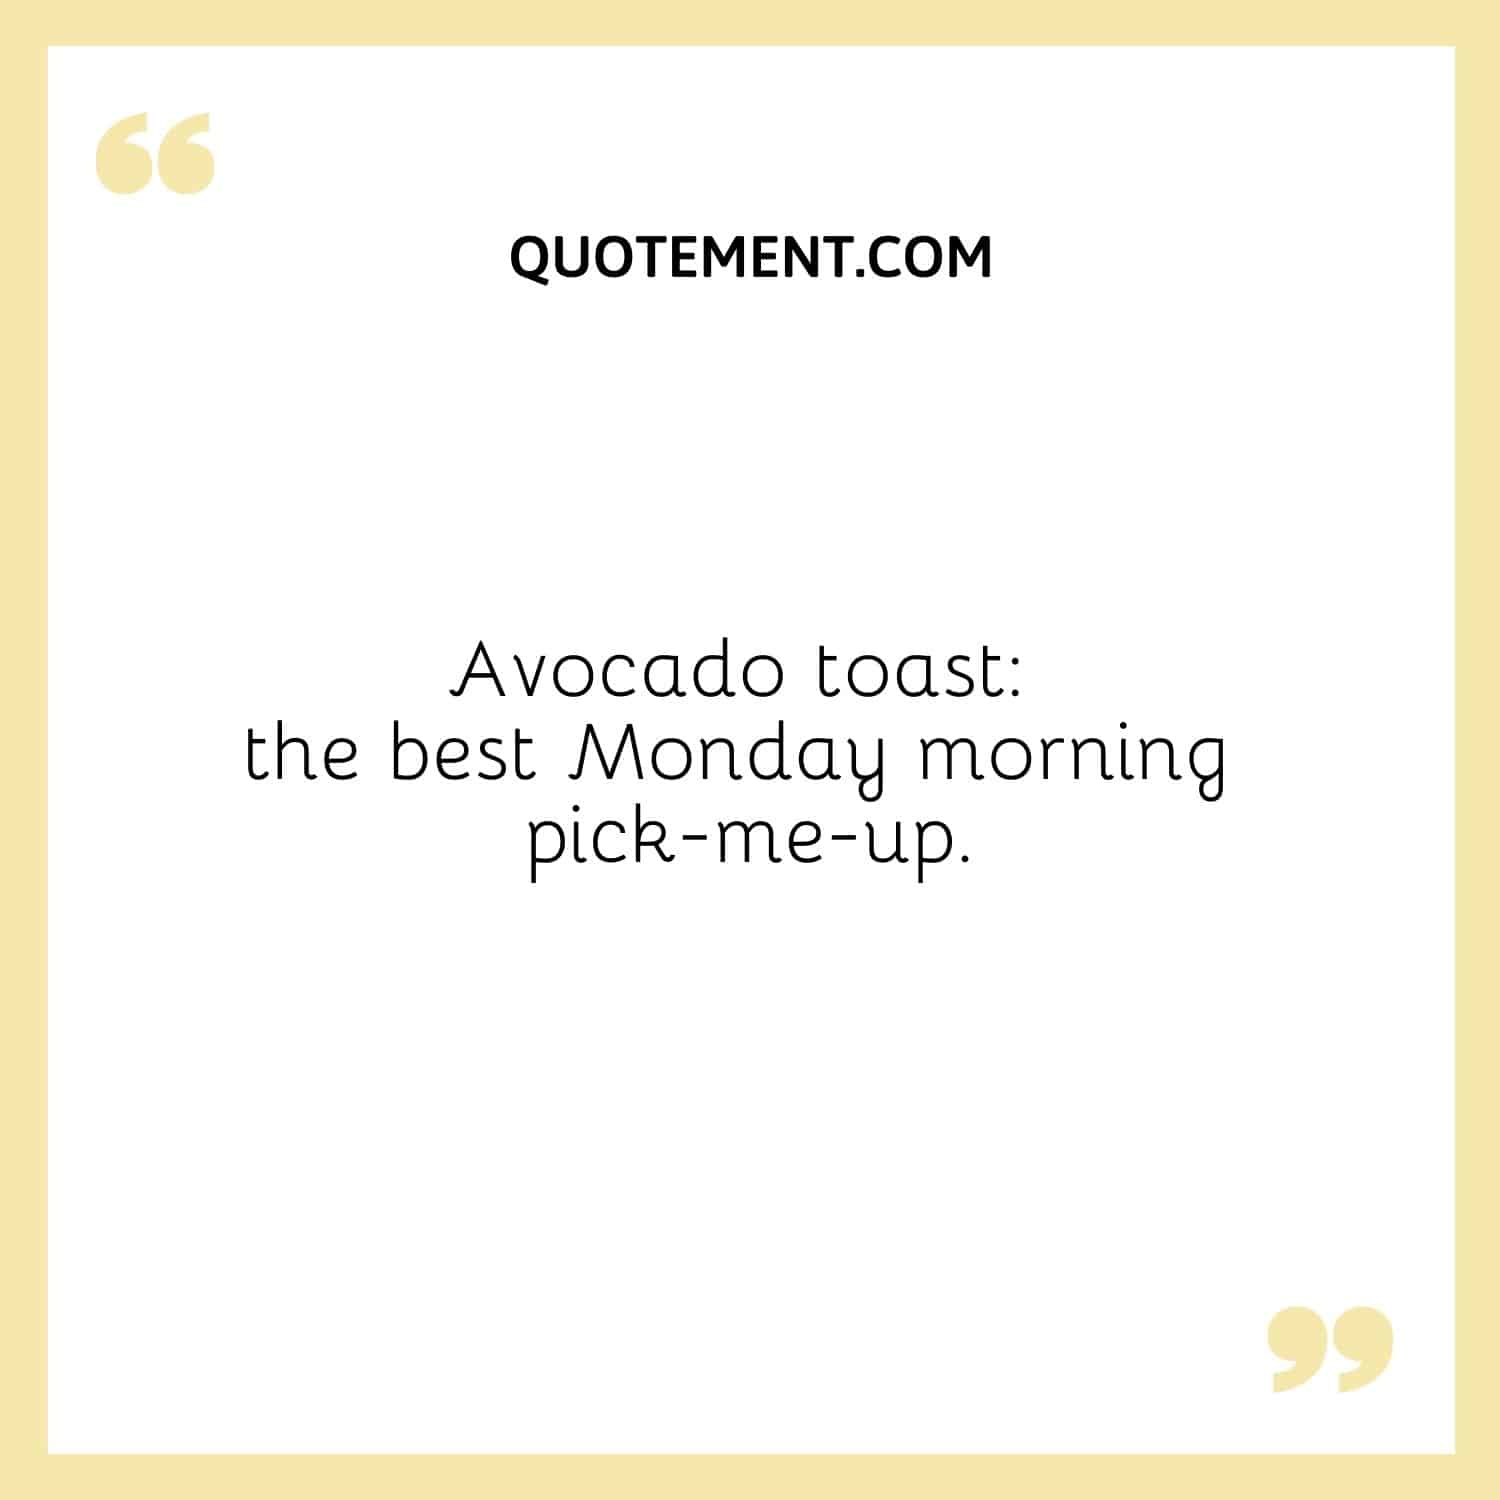 Avocado toast the best Monday morning pick-me-up.